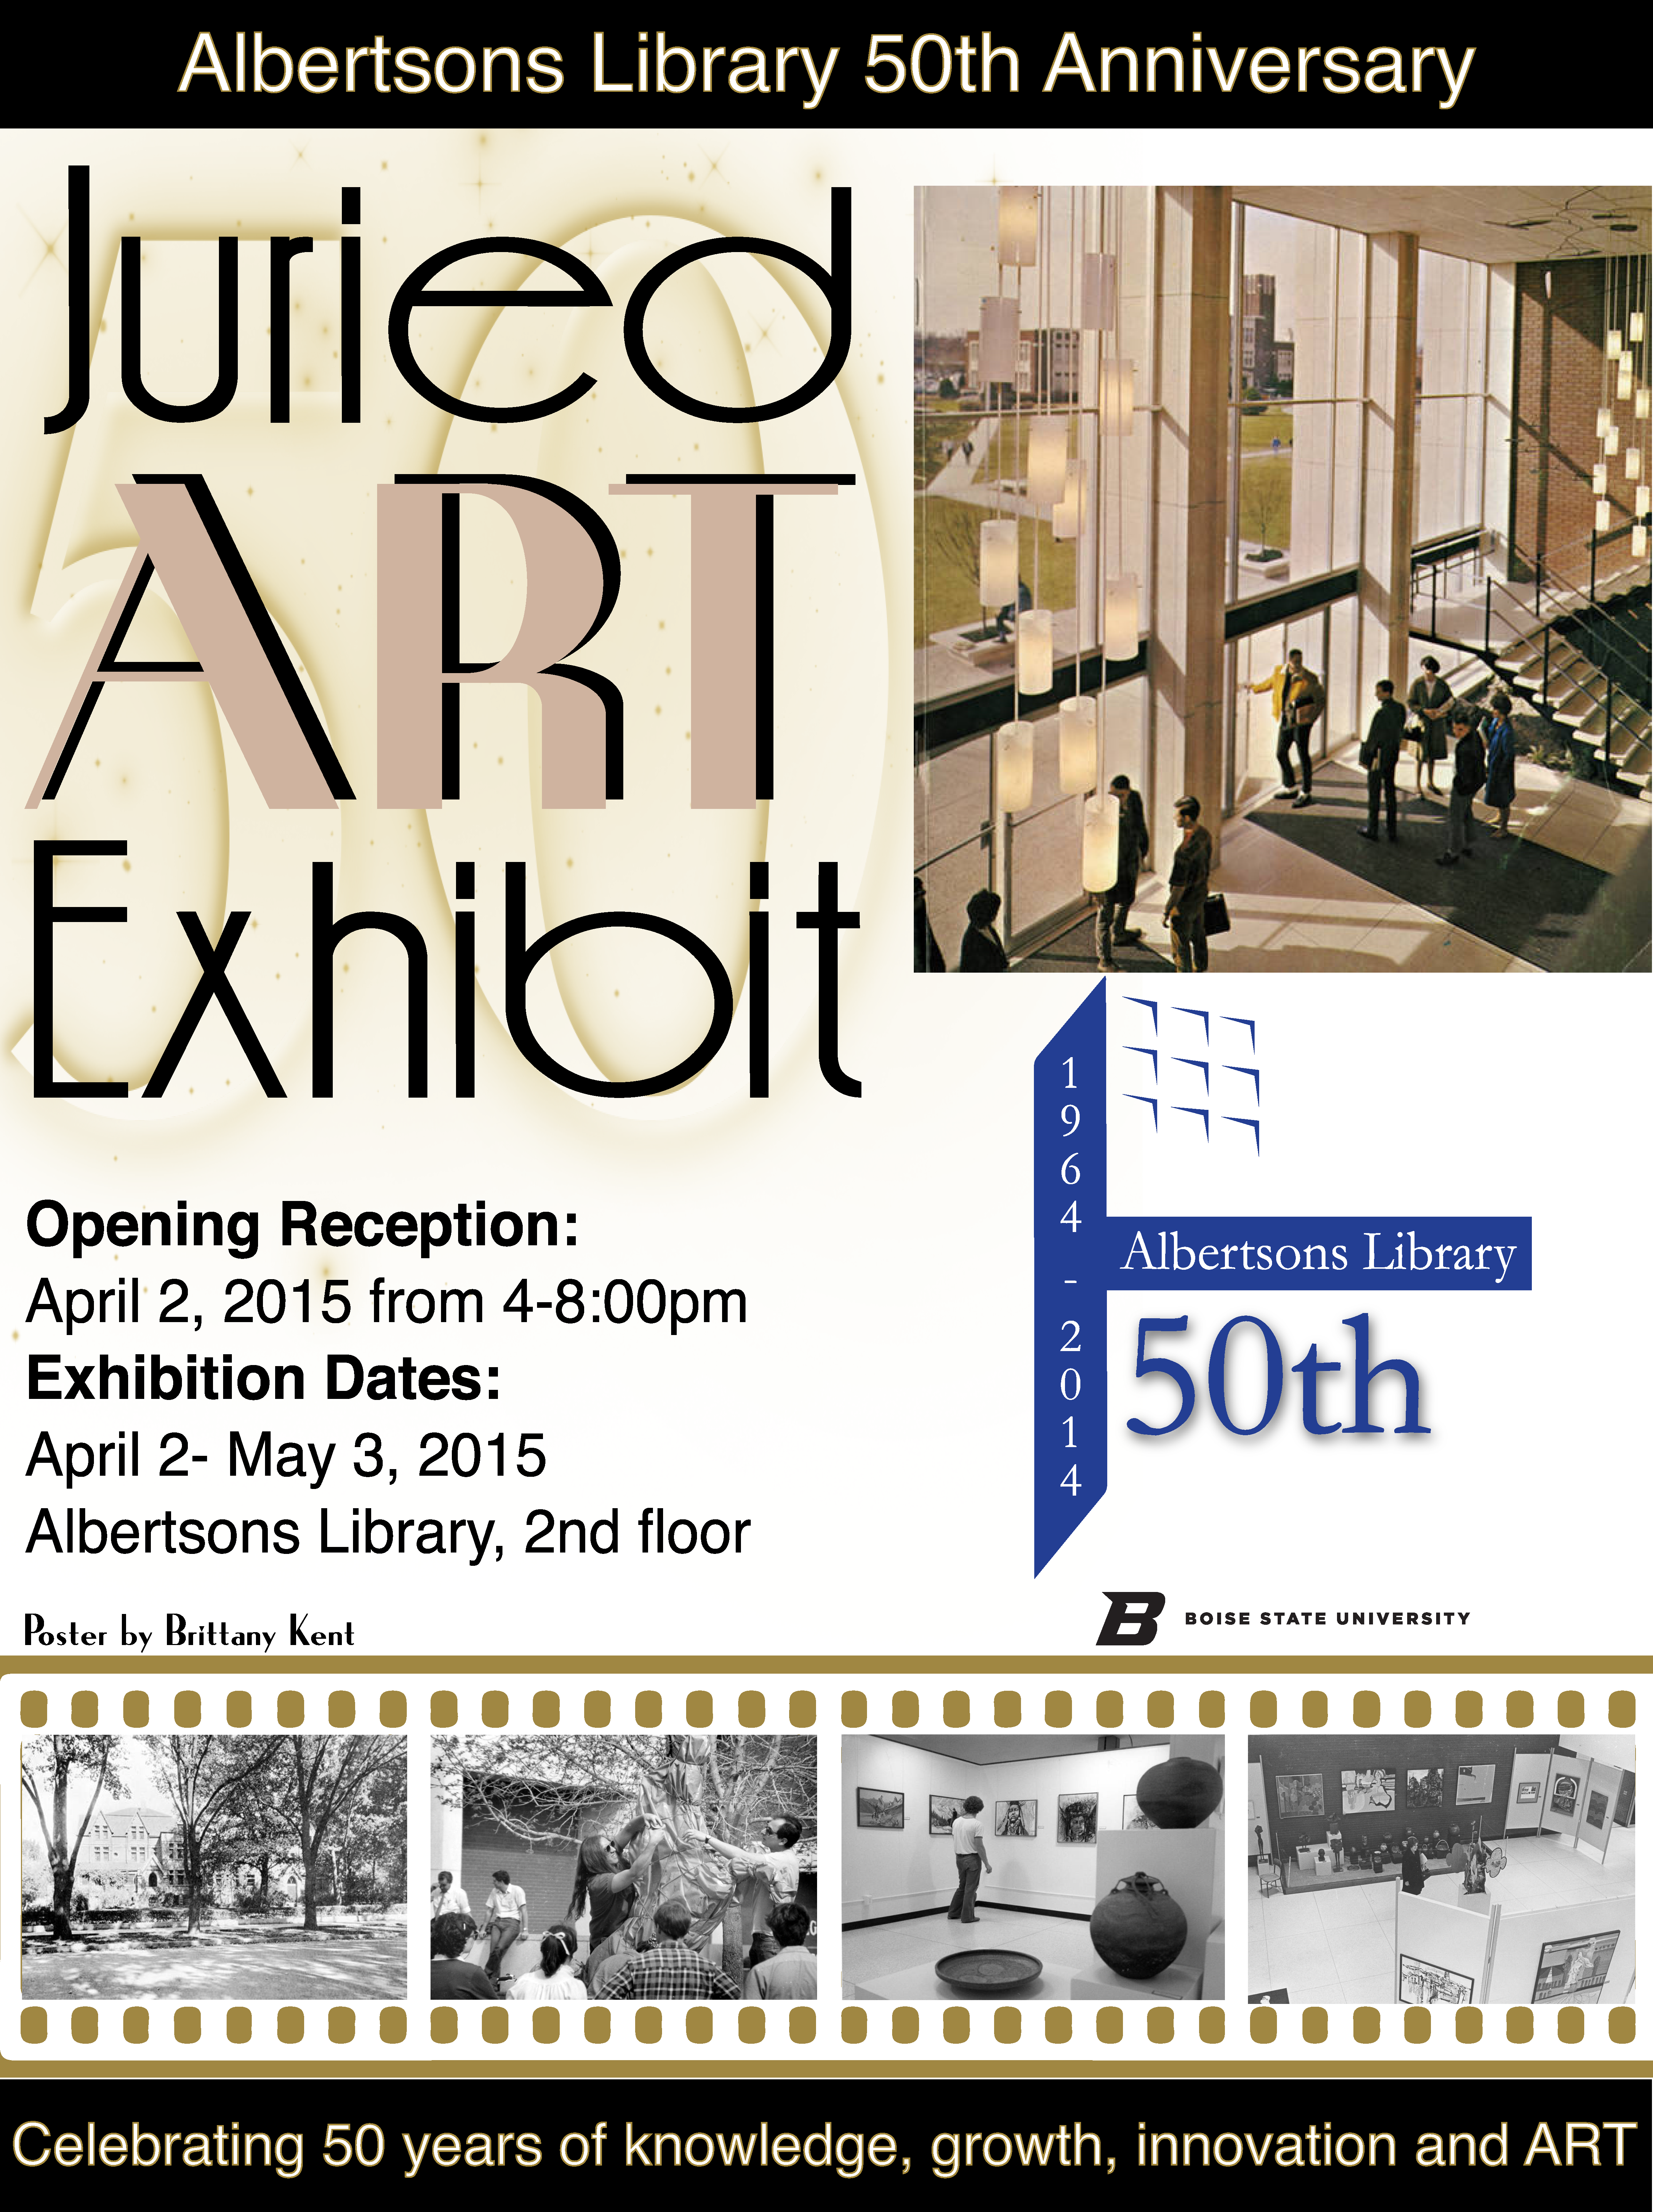 Albertsons Library 50th Anniversary Juried Art Exhibition